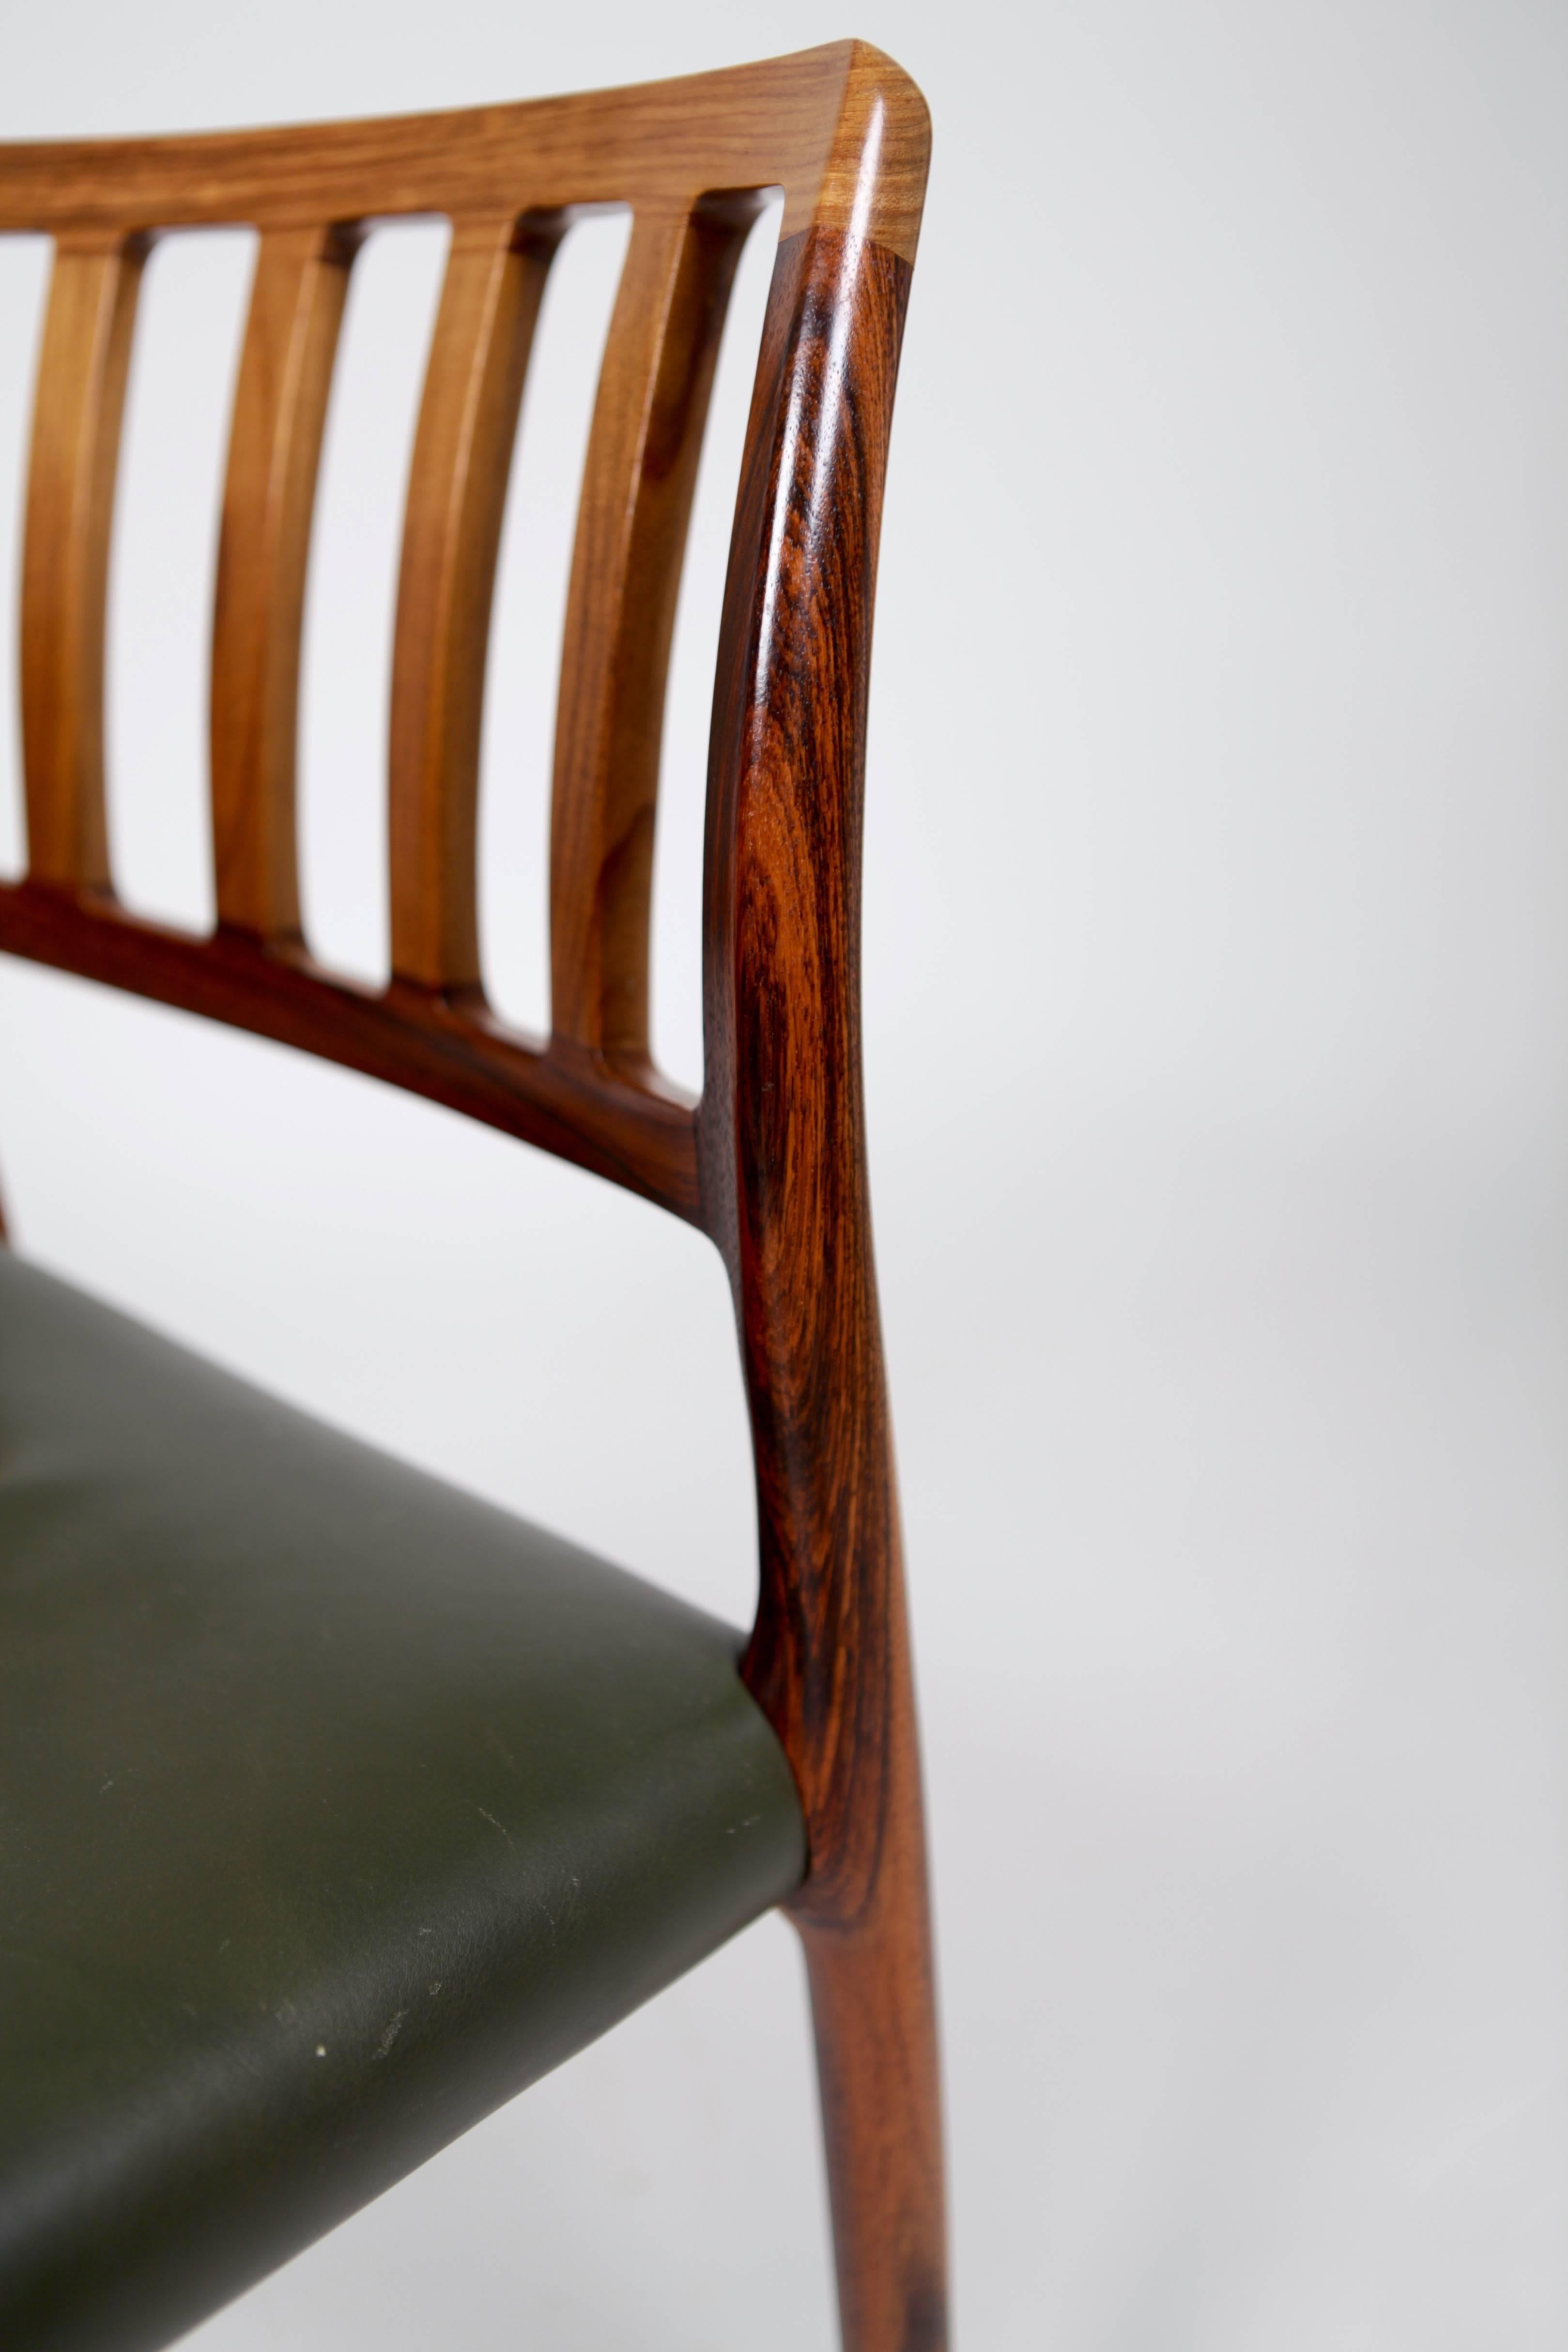 Leather Niels O. Møller, Set of Six East Indian Rosewood Dining Chairs